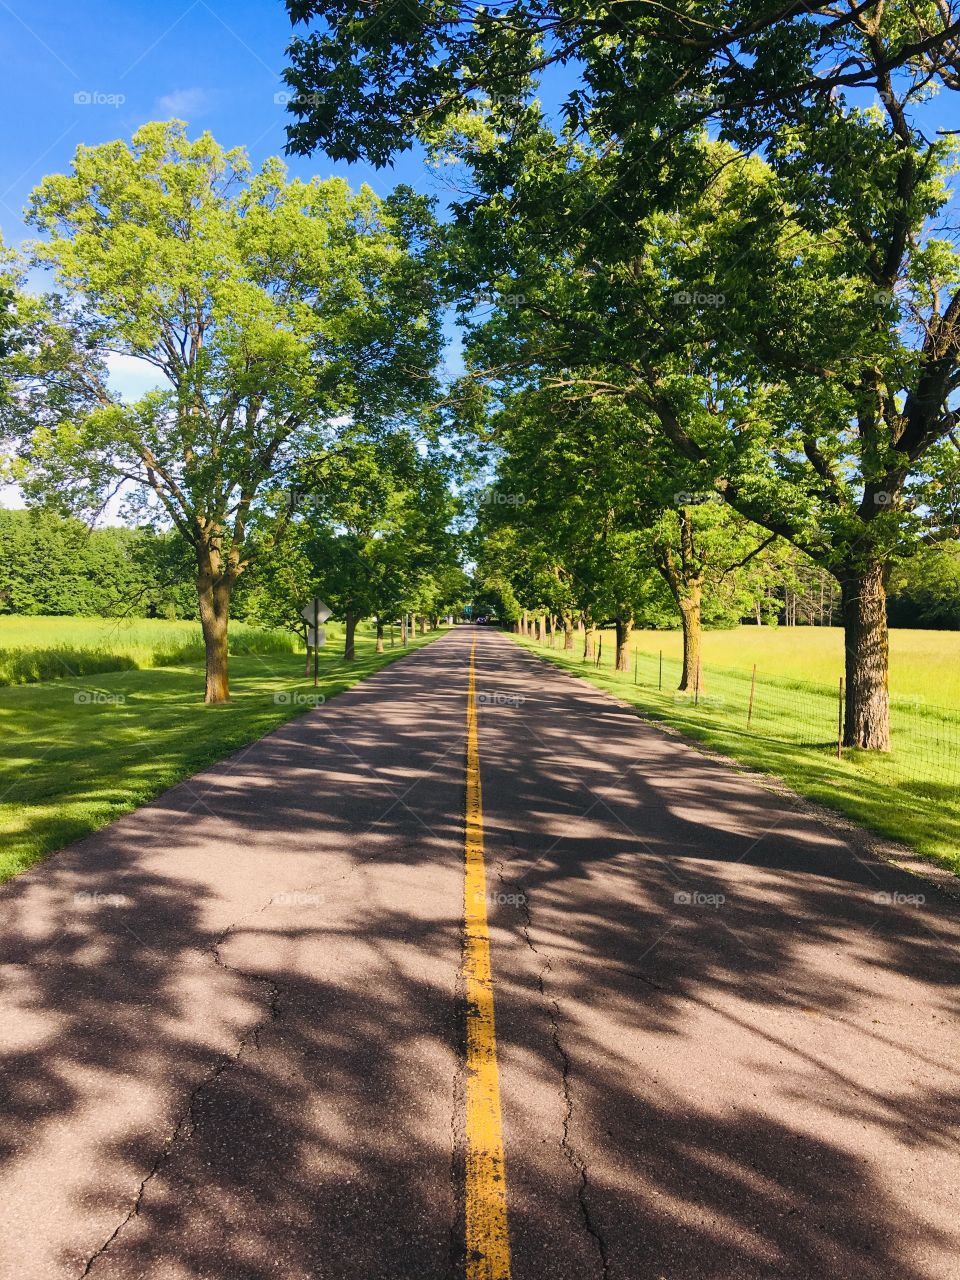 A Peaceful Summer Road